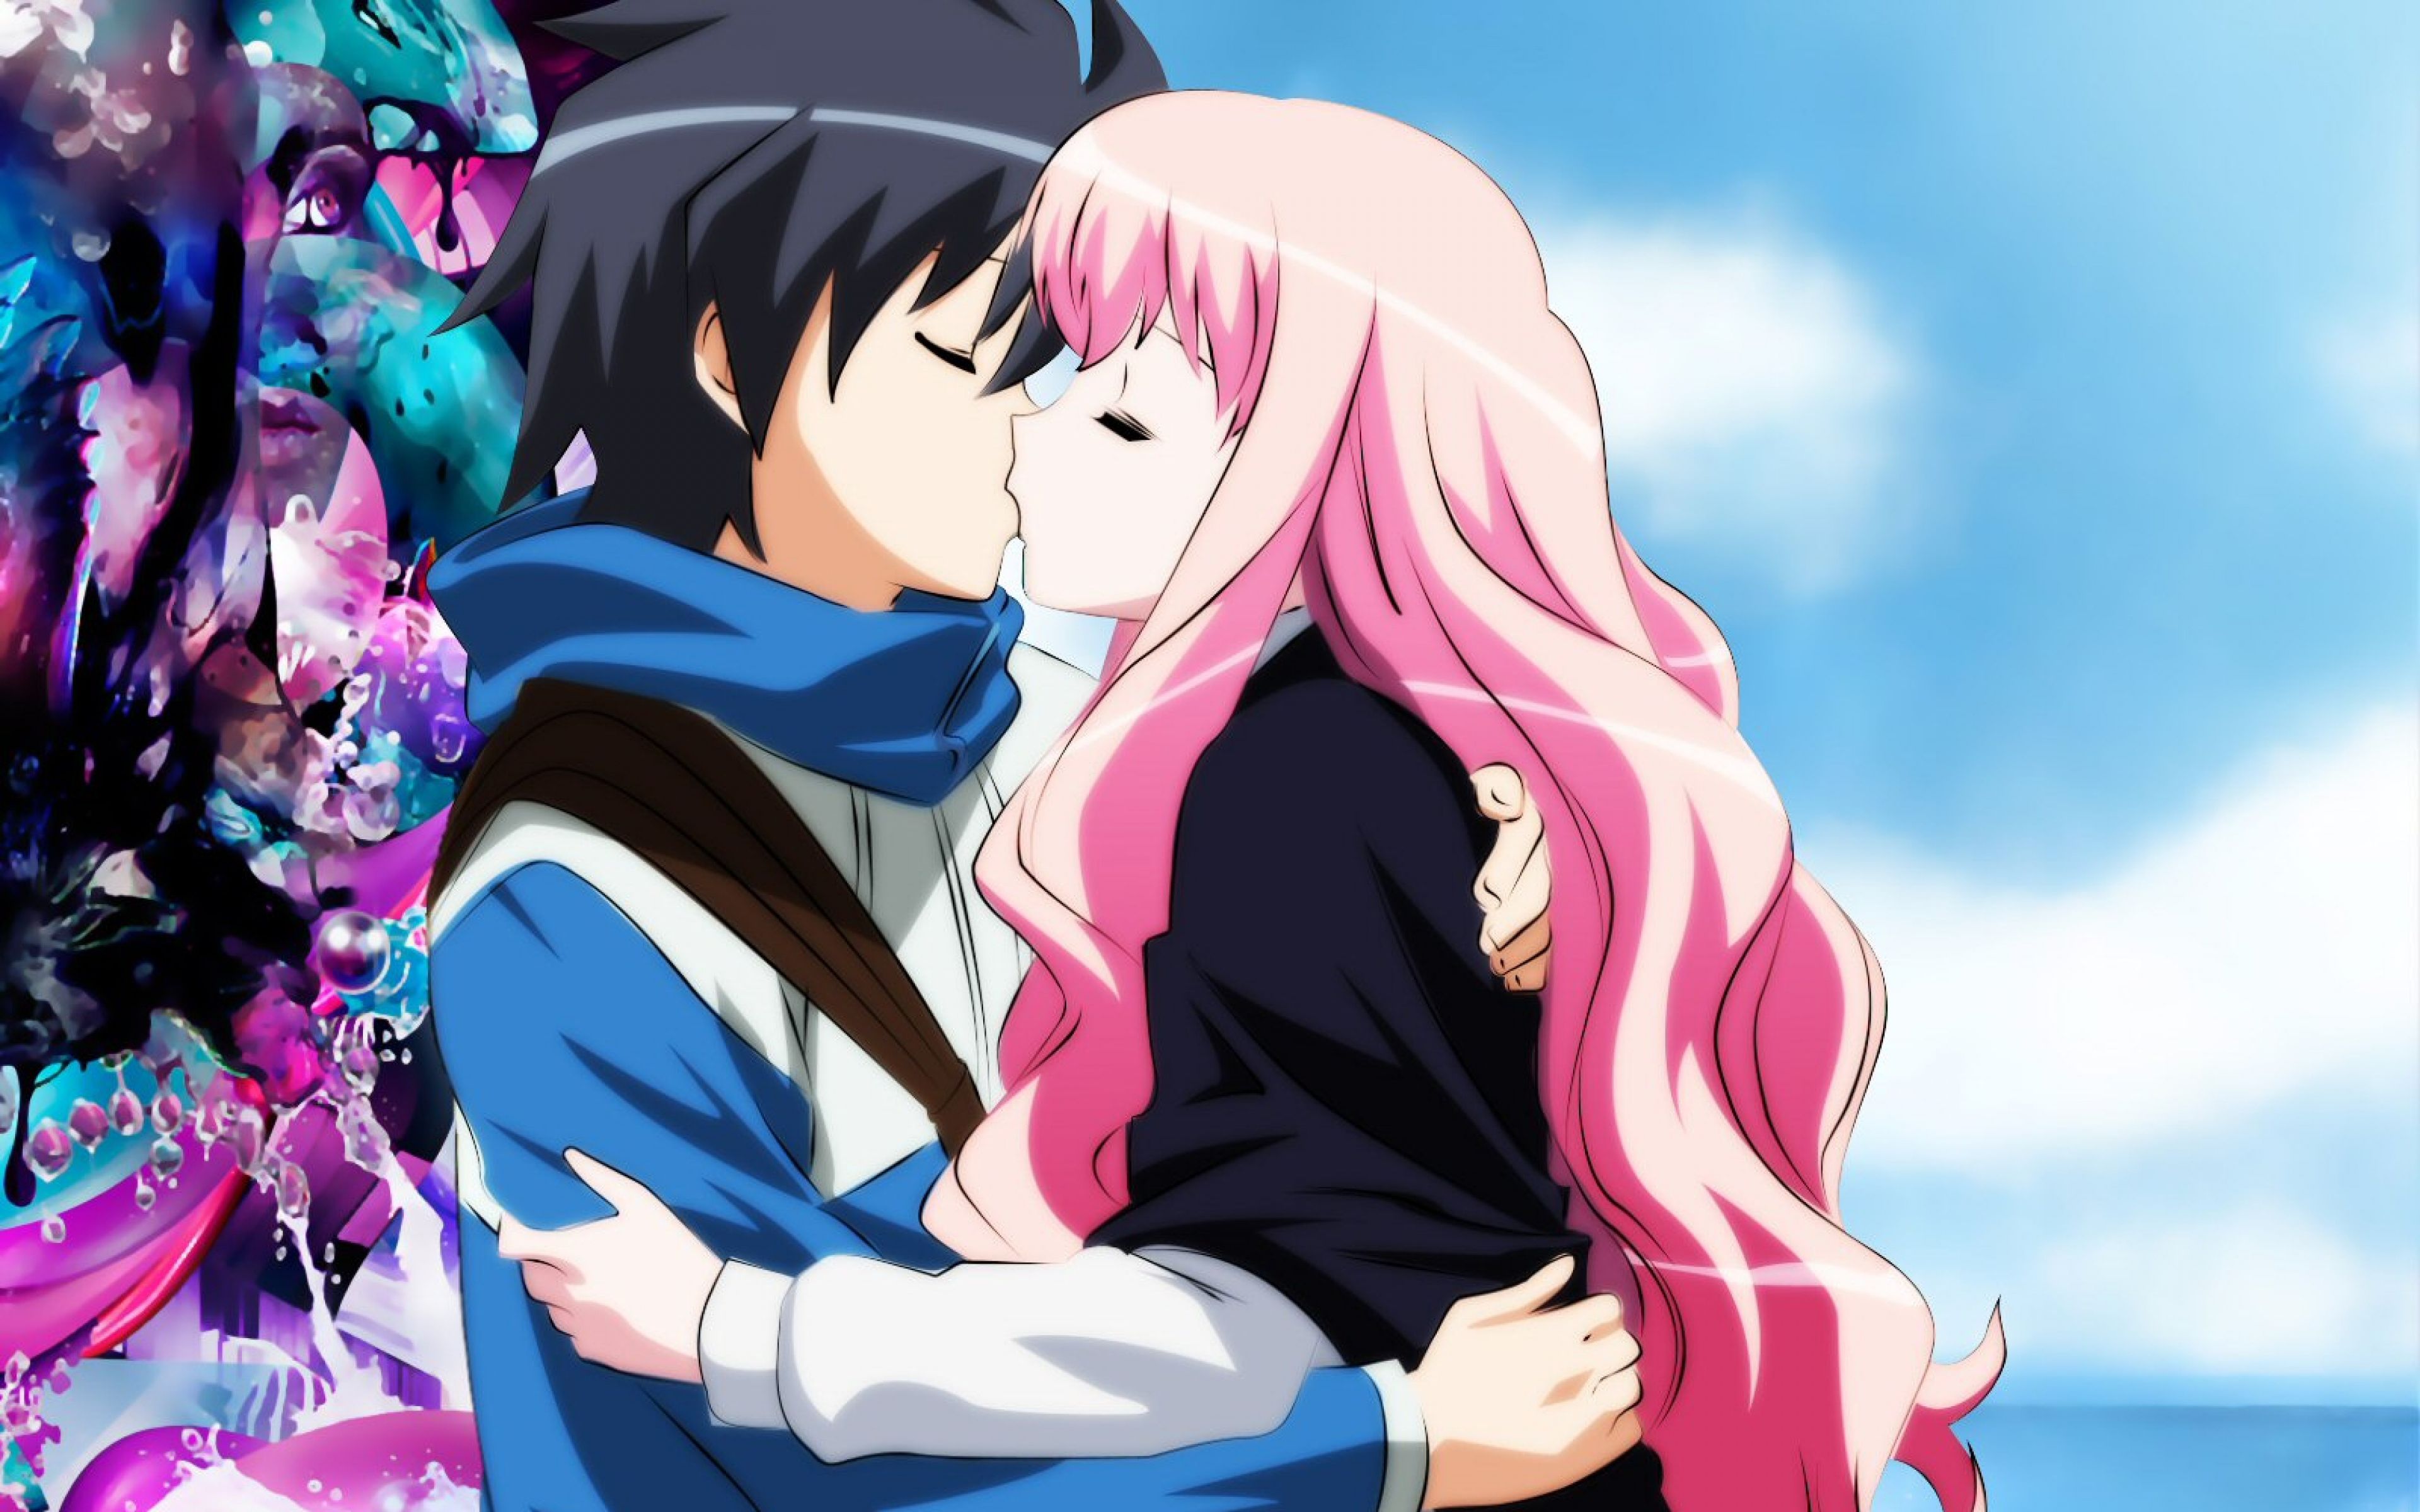 anato aflam: Pictures Of Anime Boy And Girl Kissing.